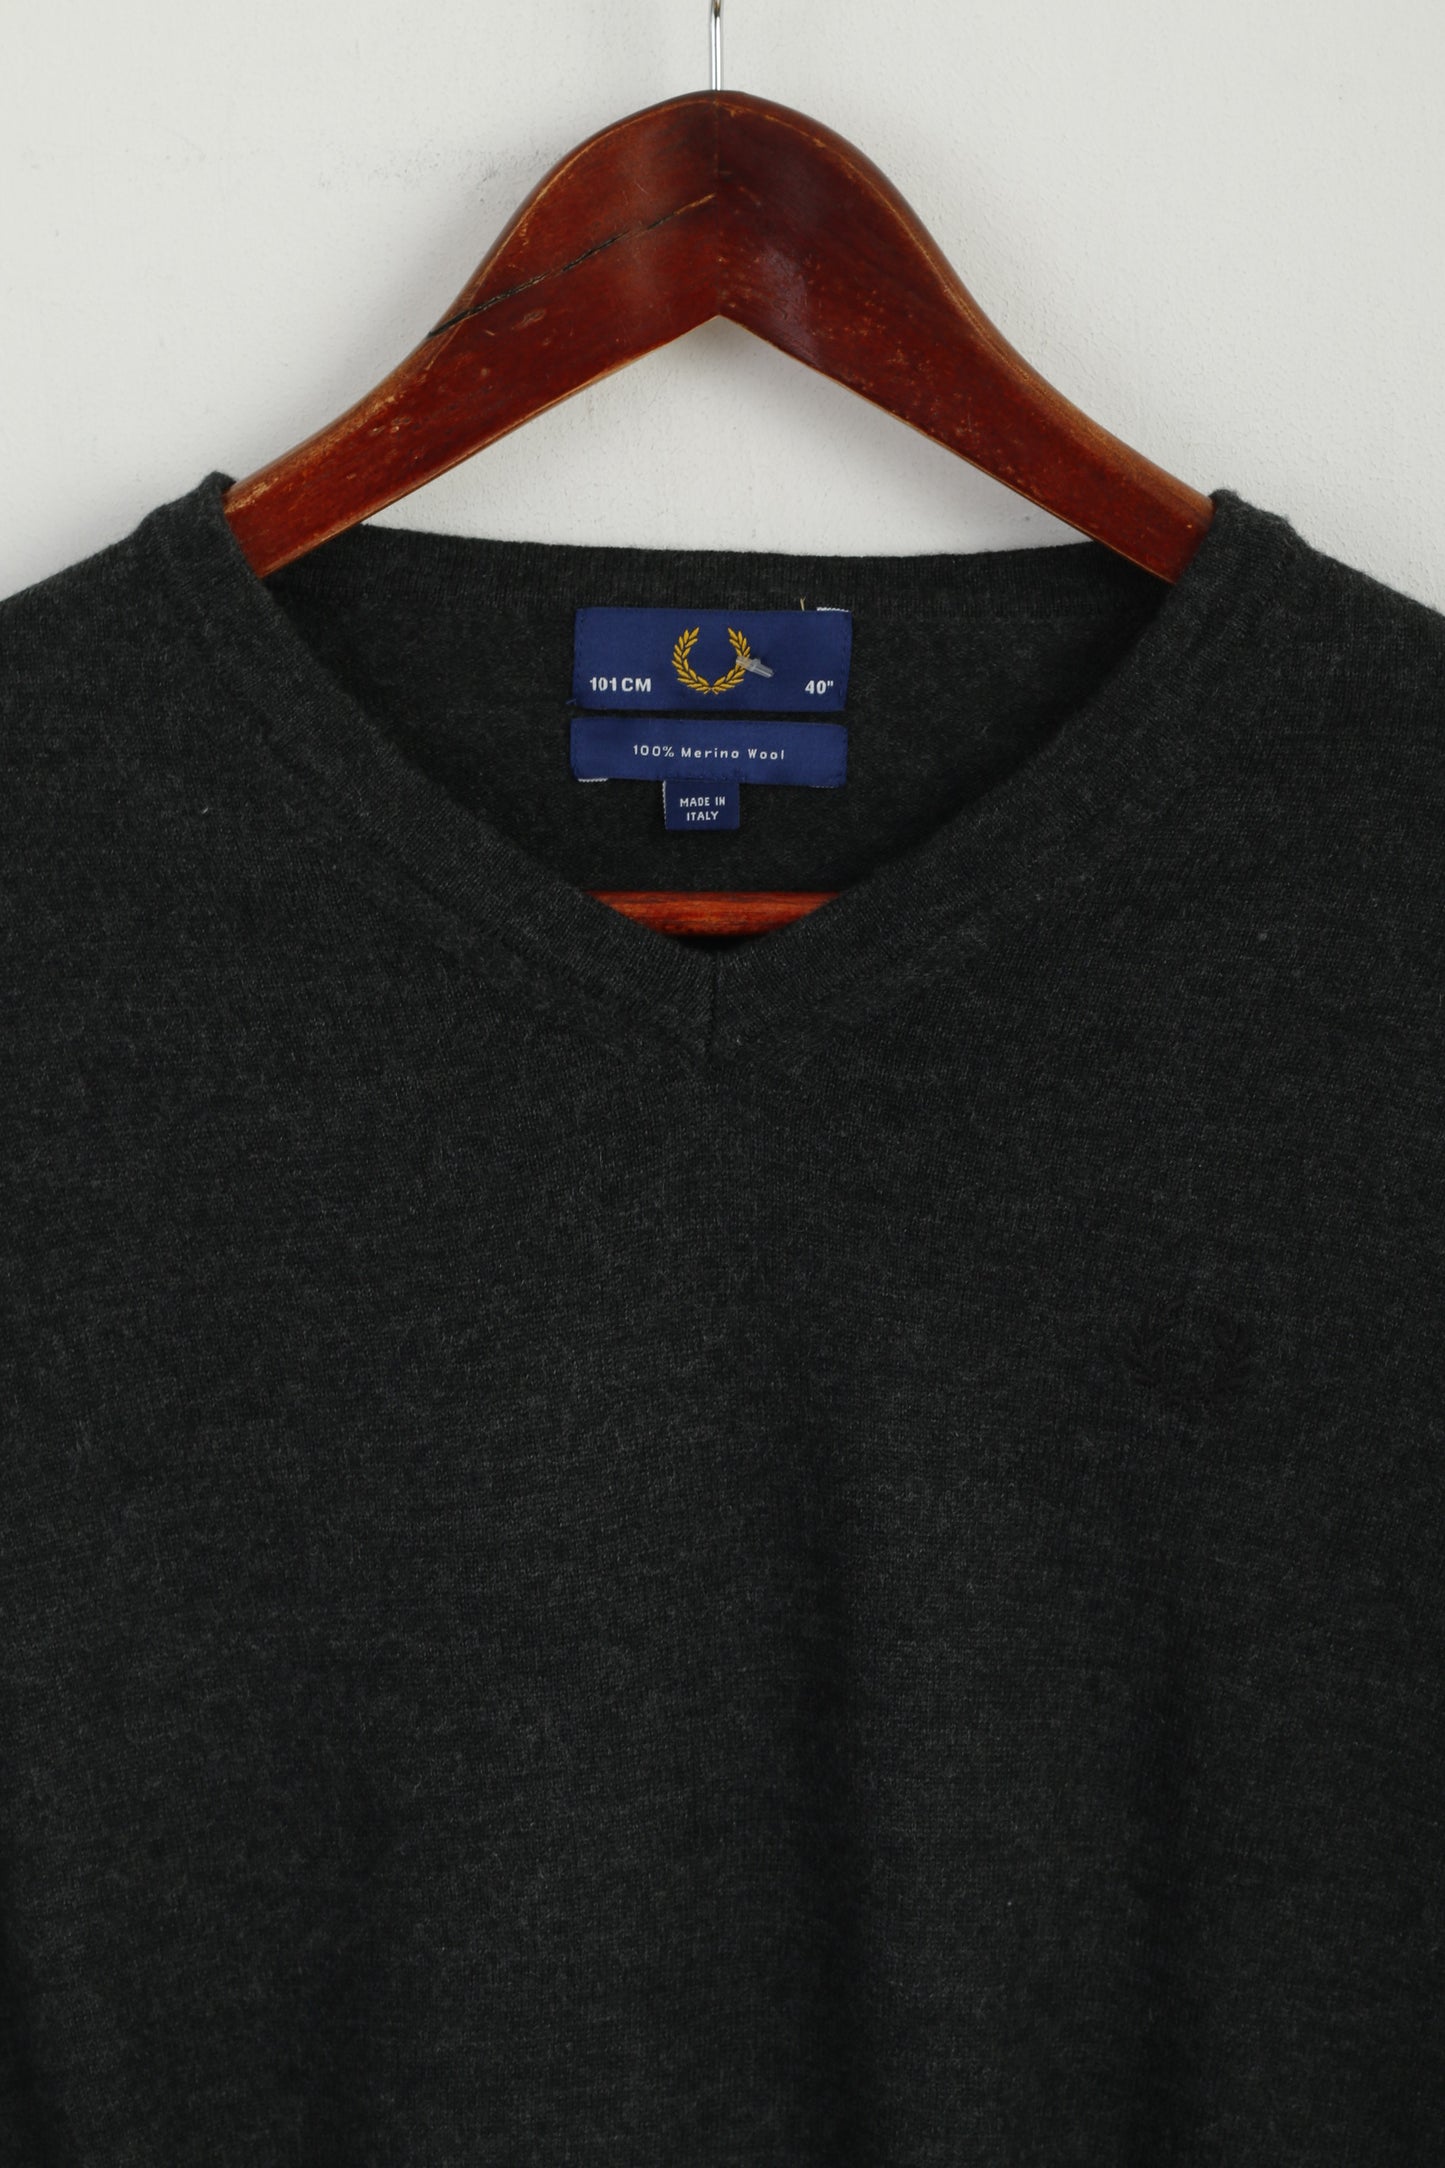 Fred Perry Boys 101cm 40" 12 Age Jumper Grey Merino Wool Classic Sweater